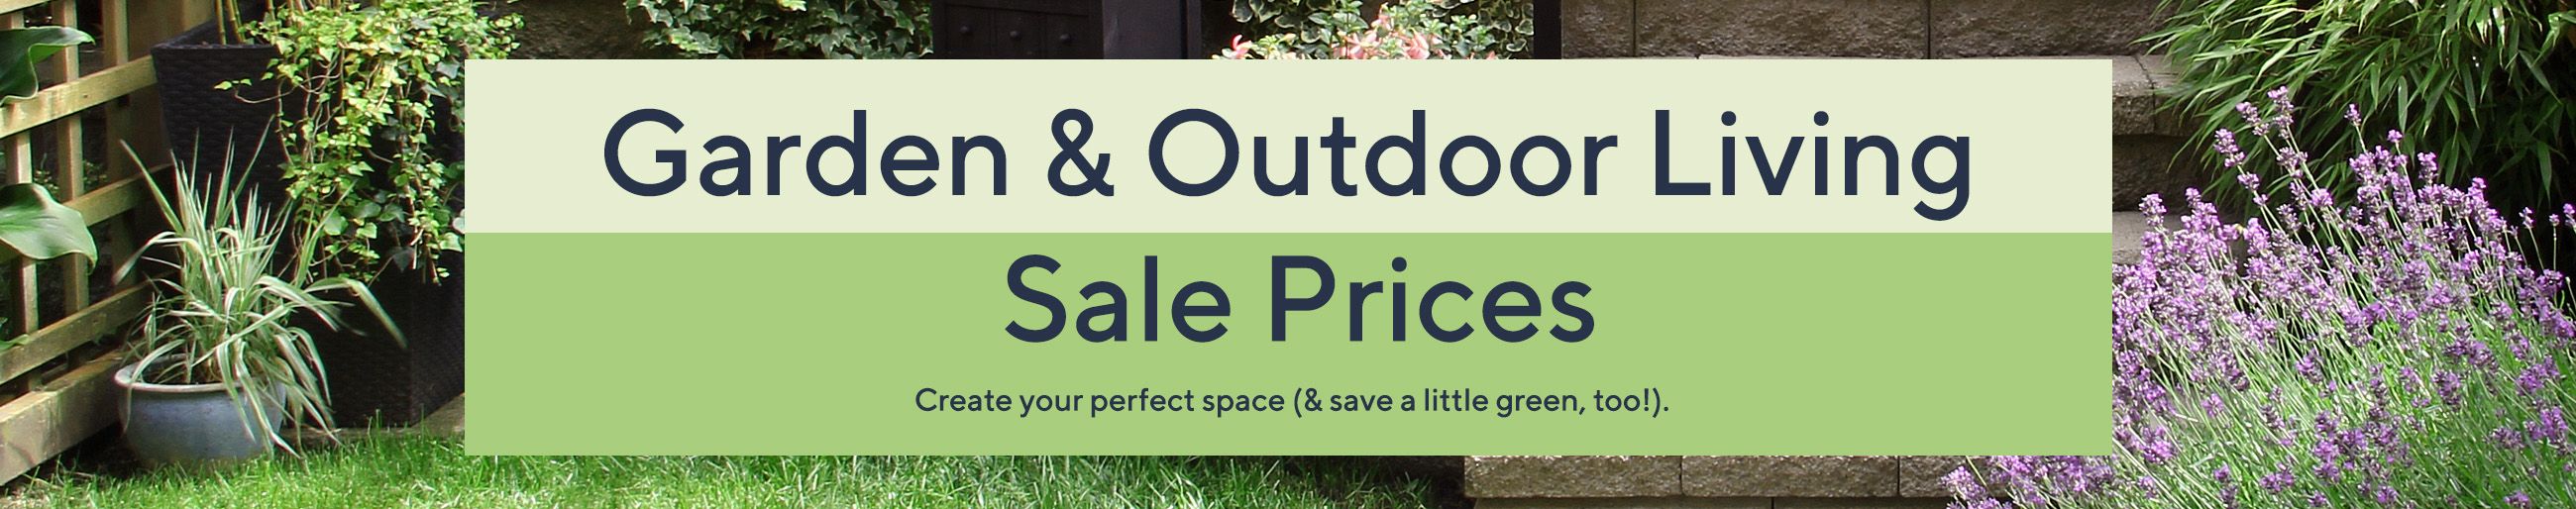 Garden & Outdoor Living Sale Prices - Create your perfect space (& save a little green, too!). 